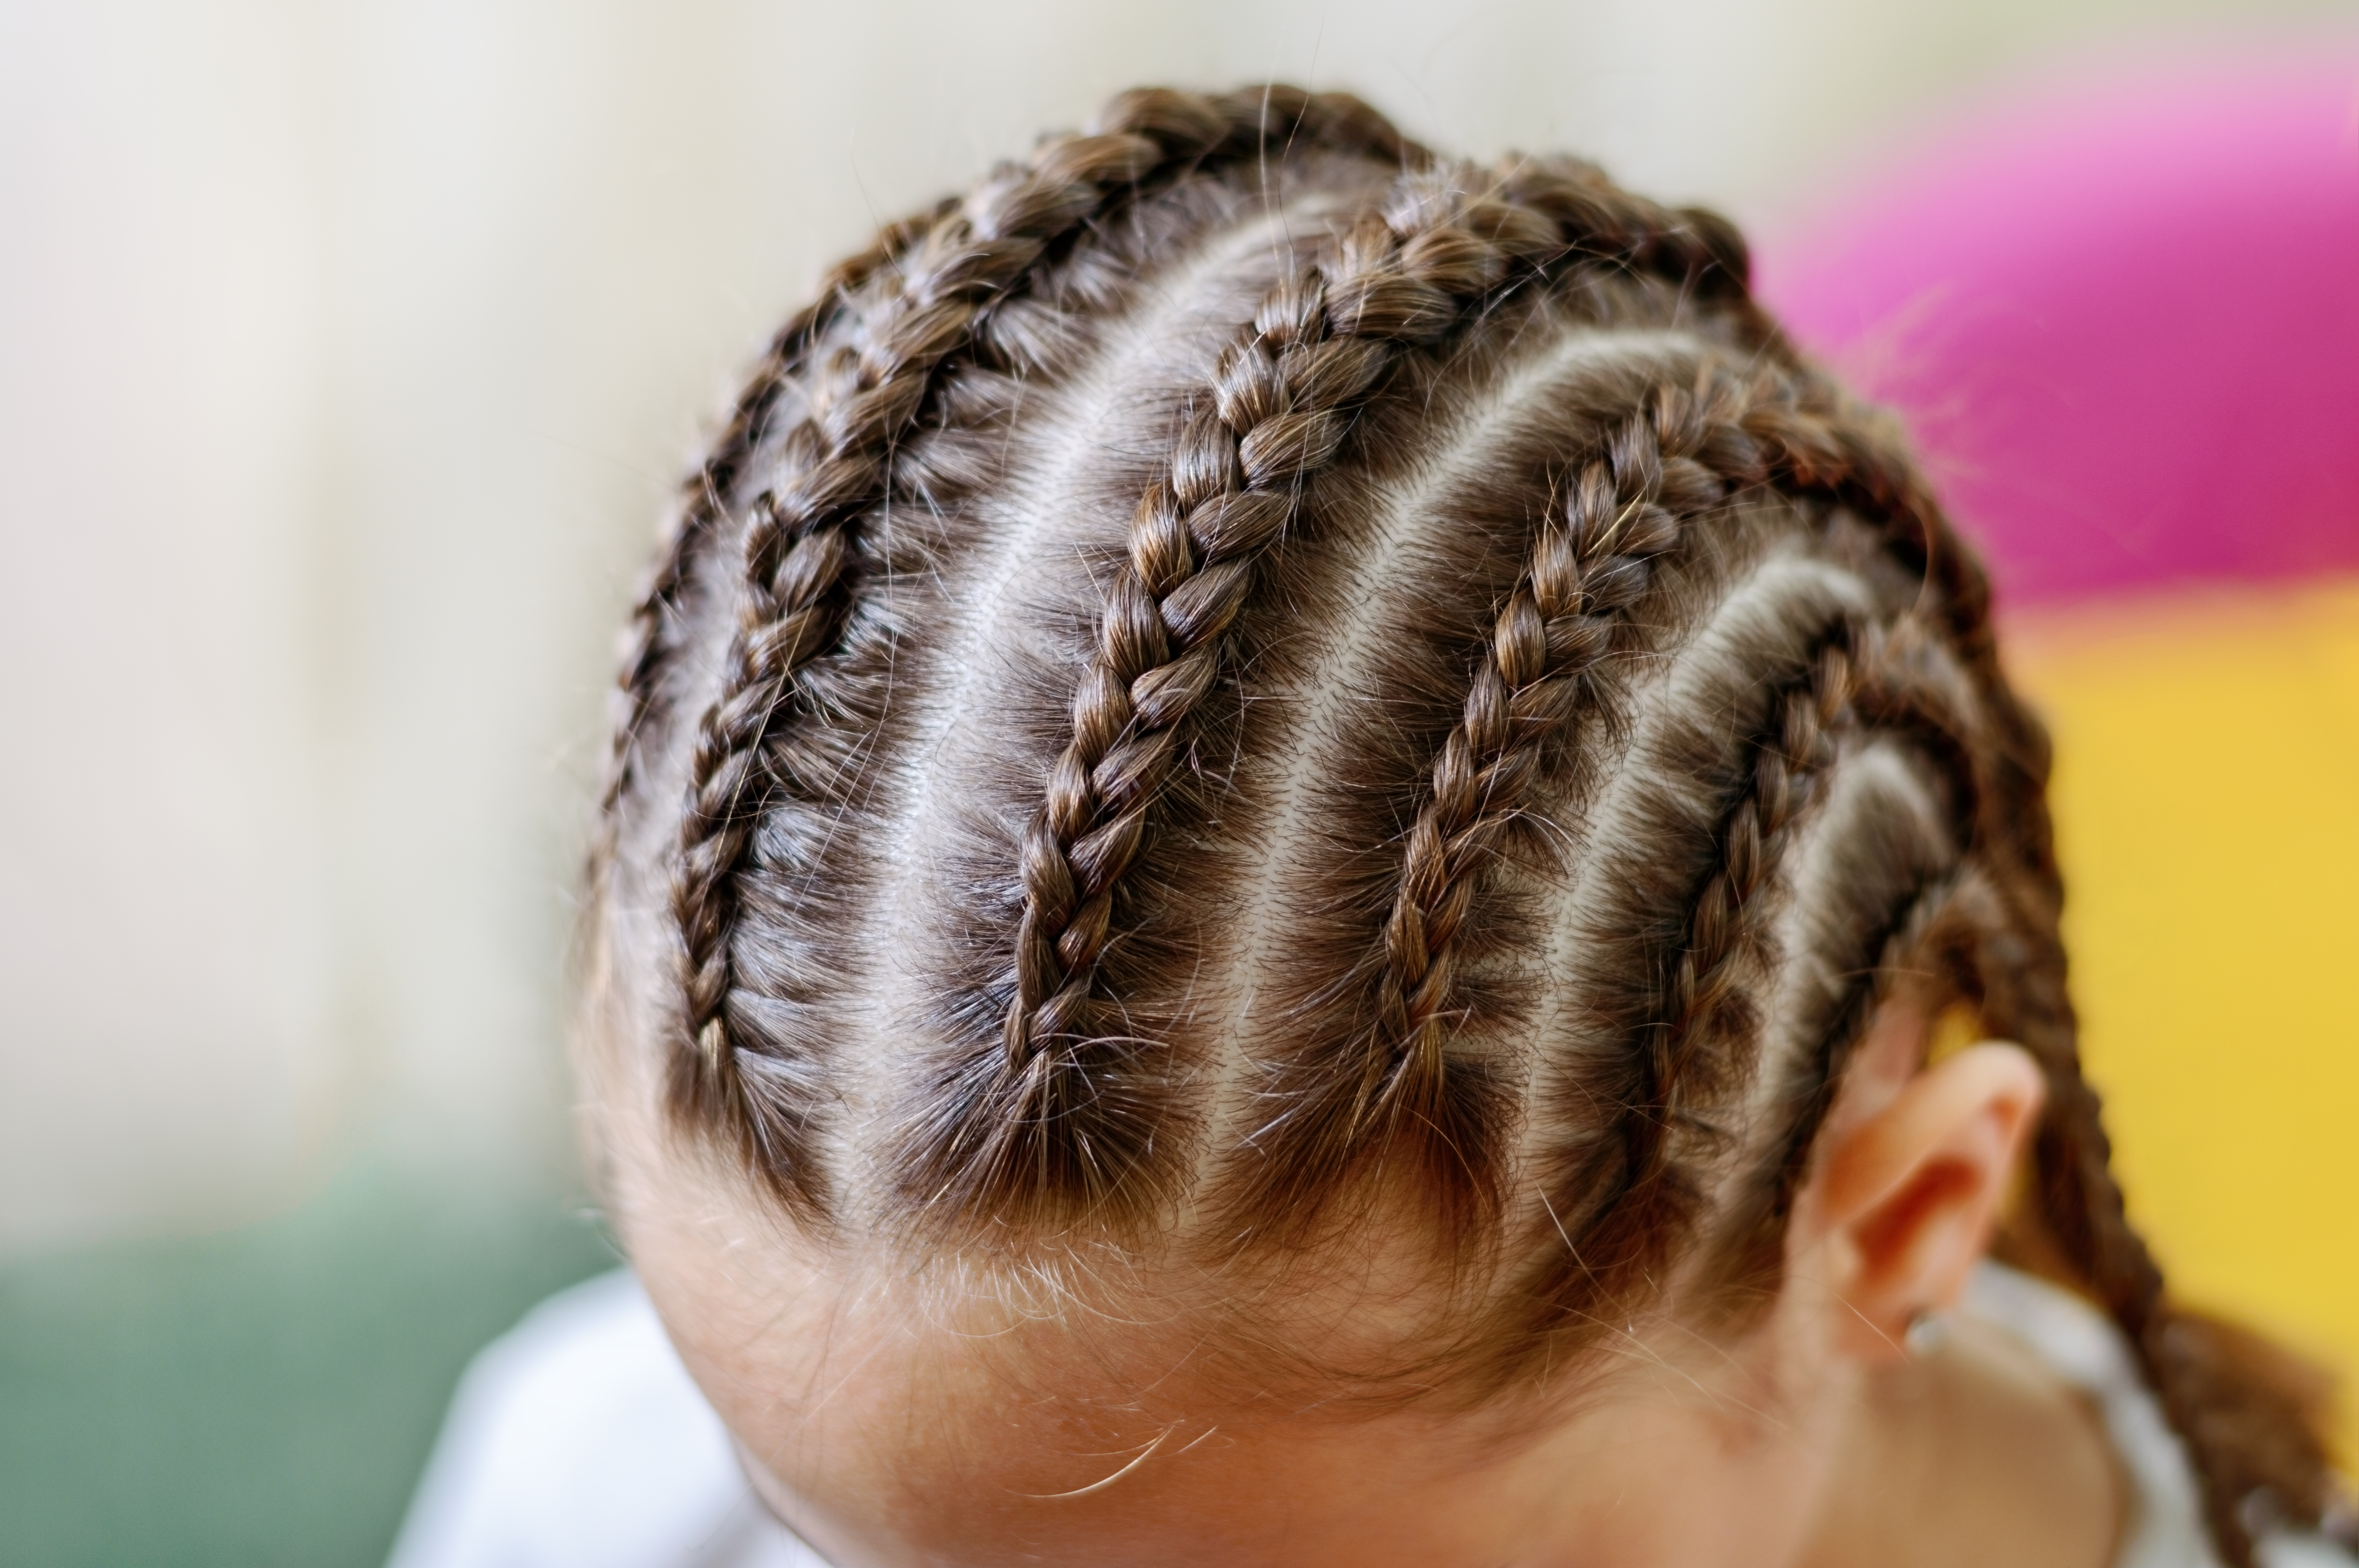 https://www.allskins.co.uk/wp-content/uploads/2023/11/girl-with-many-small-braids-texture-of-plaits-close-up-selective-focus.jpg